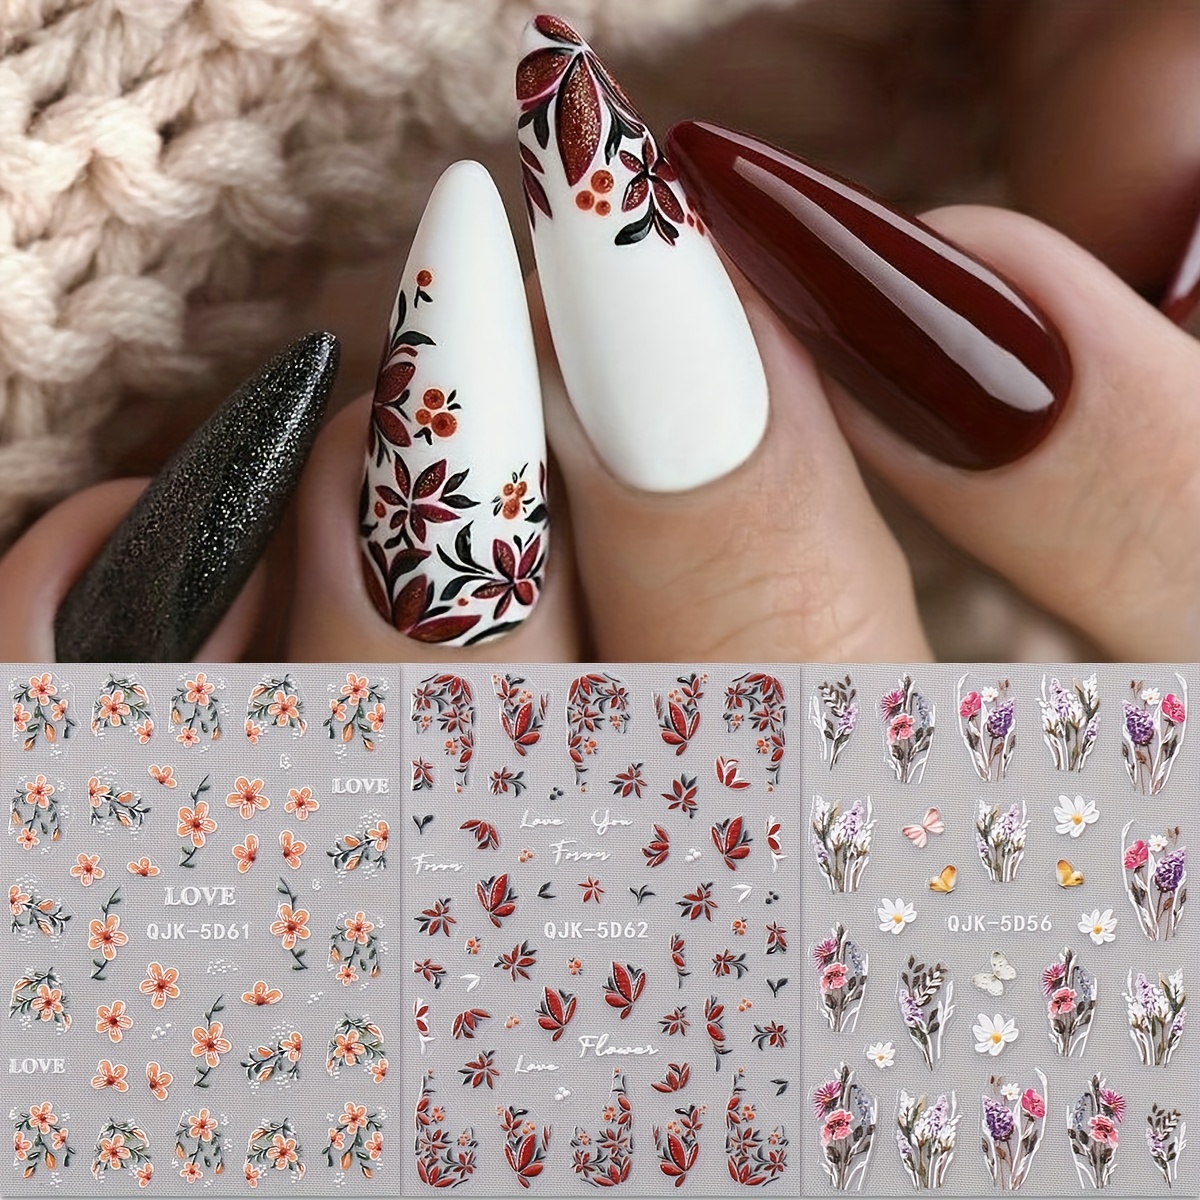 Dried Flowers Nail Art DIY Real Dried Flowers for Nail Decoration Art Craft  Making Jewellery Simulation Decoration Holiday - AliExpress